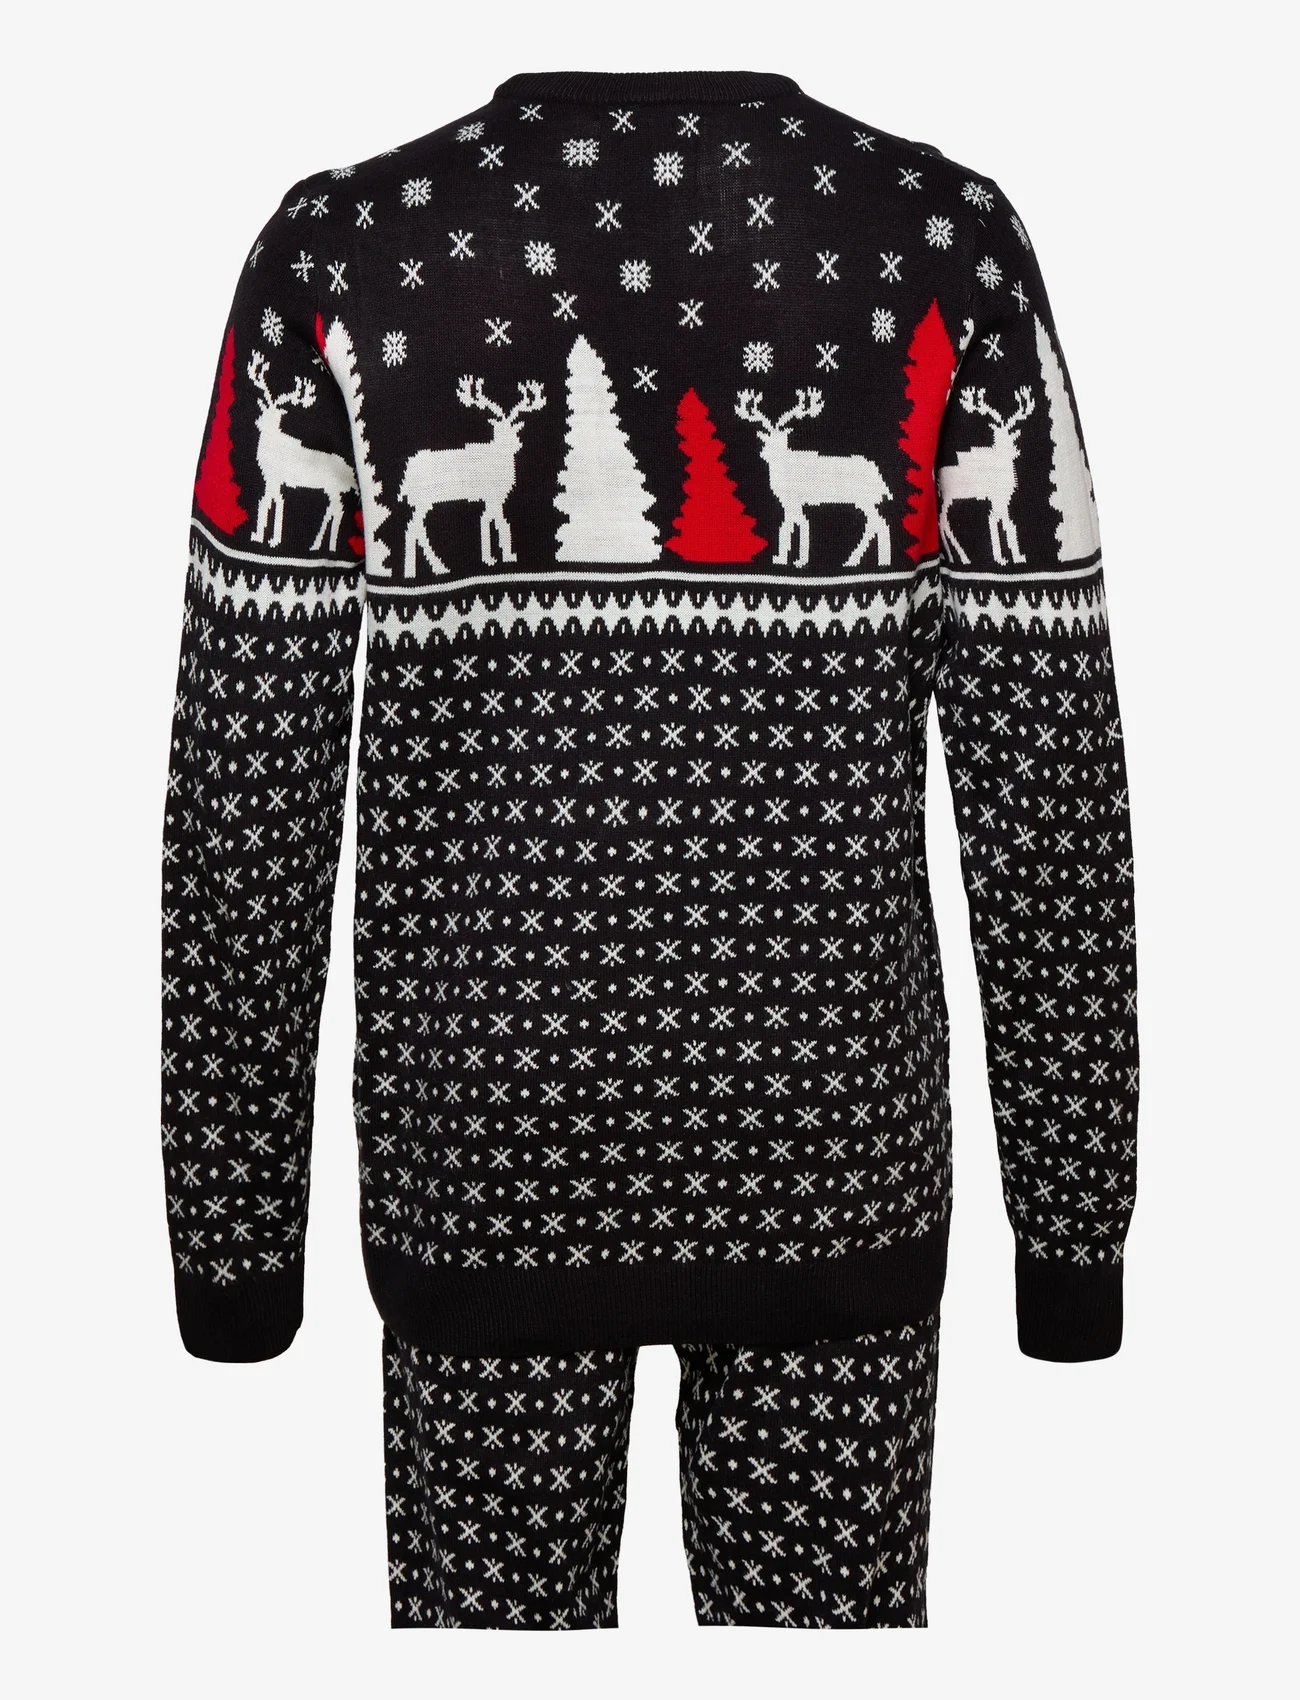 Denim project - DPXmas Deer Knitted Multipack - knitted round necks - black - 1